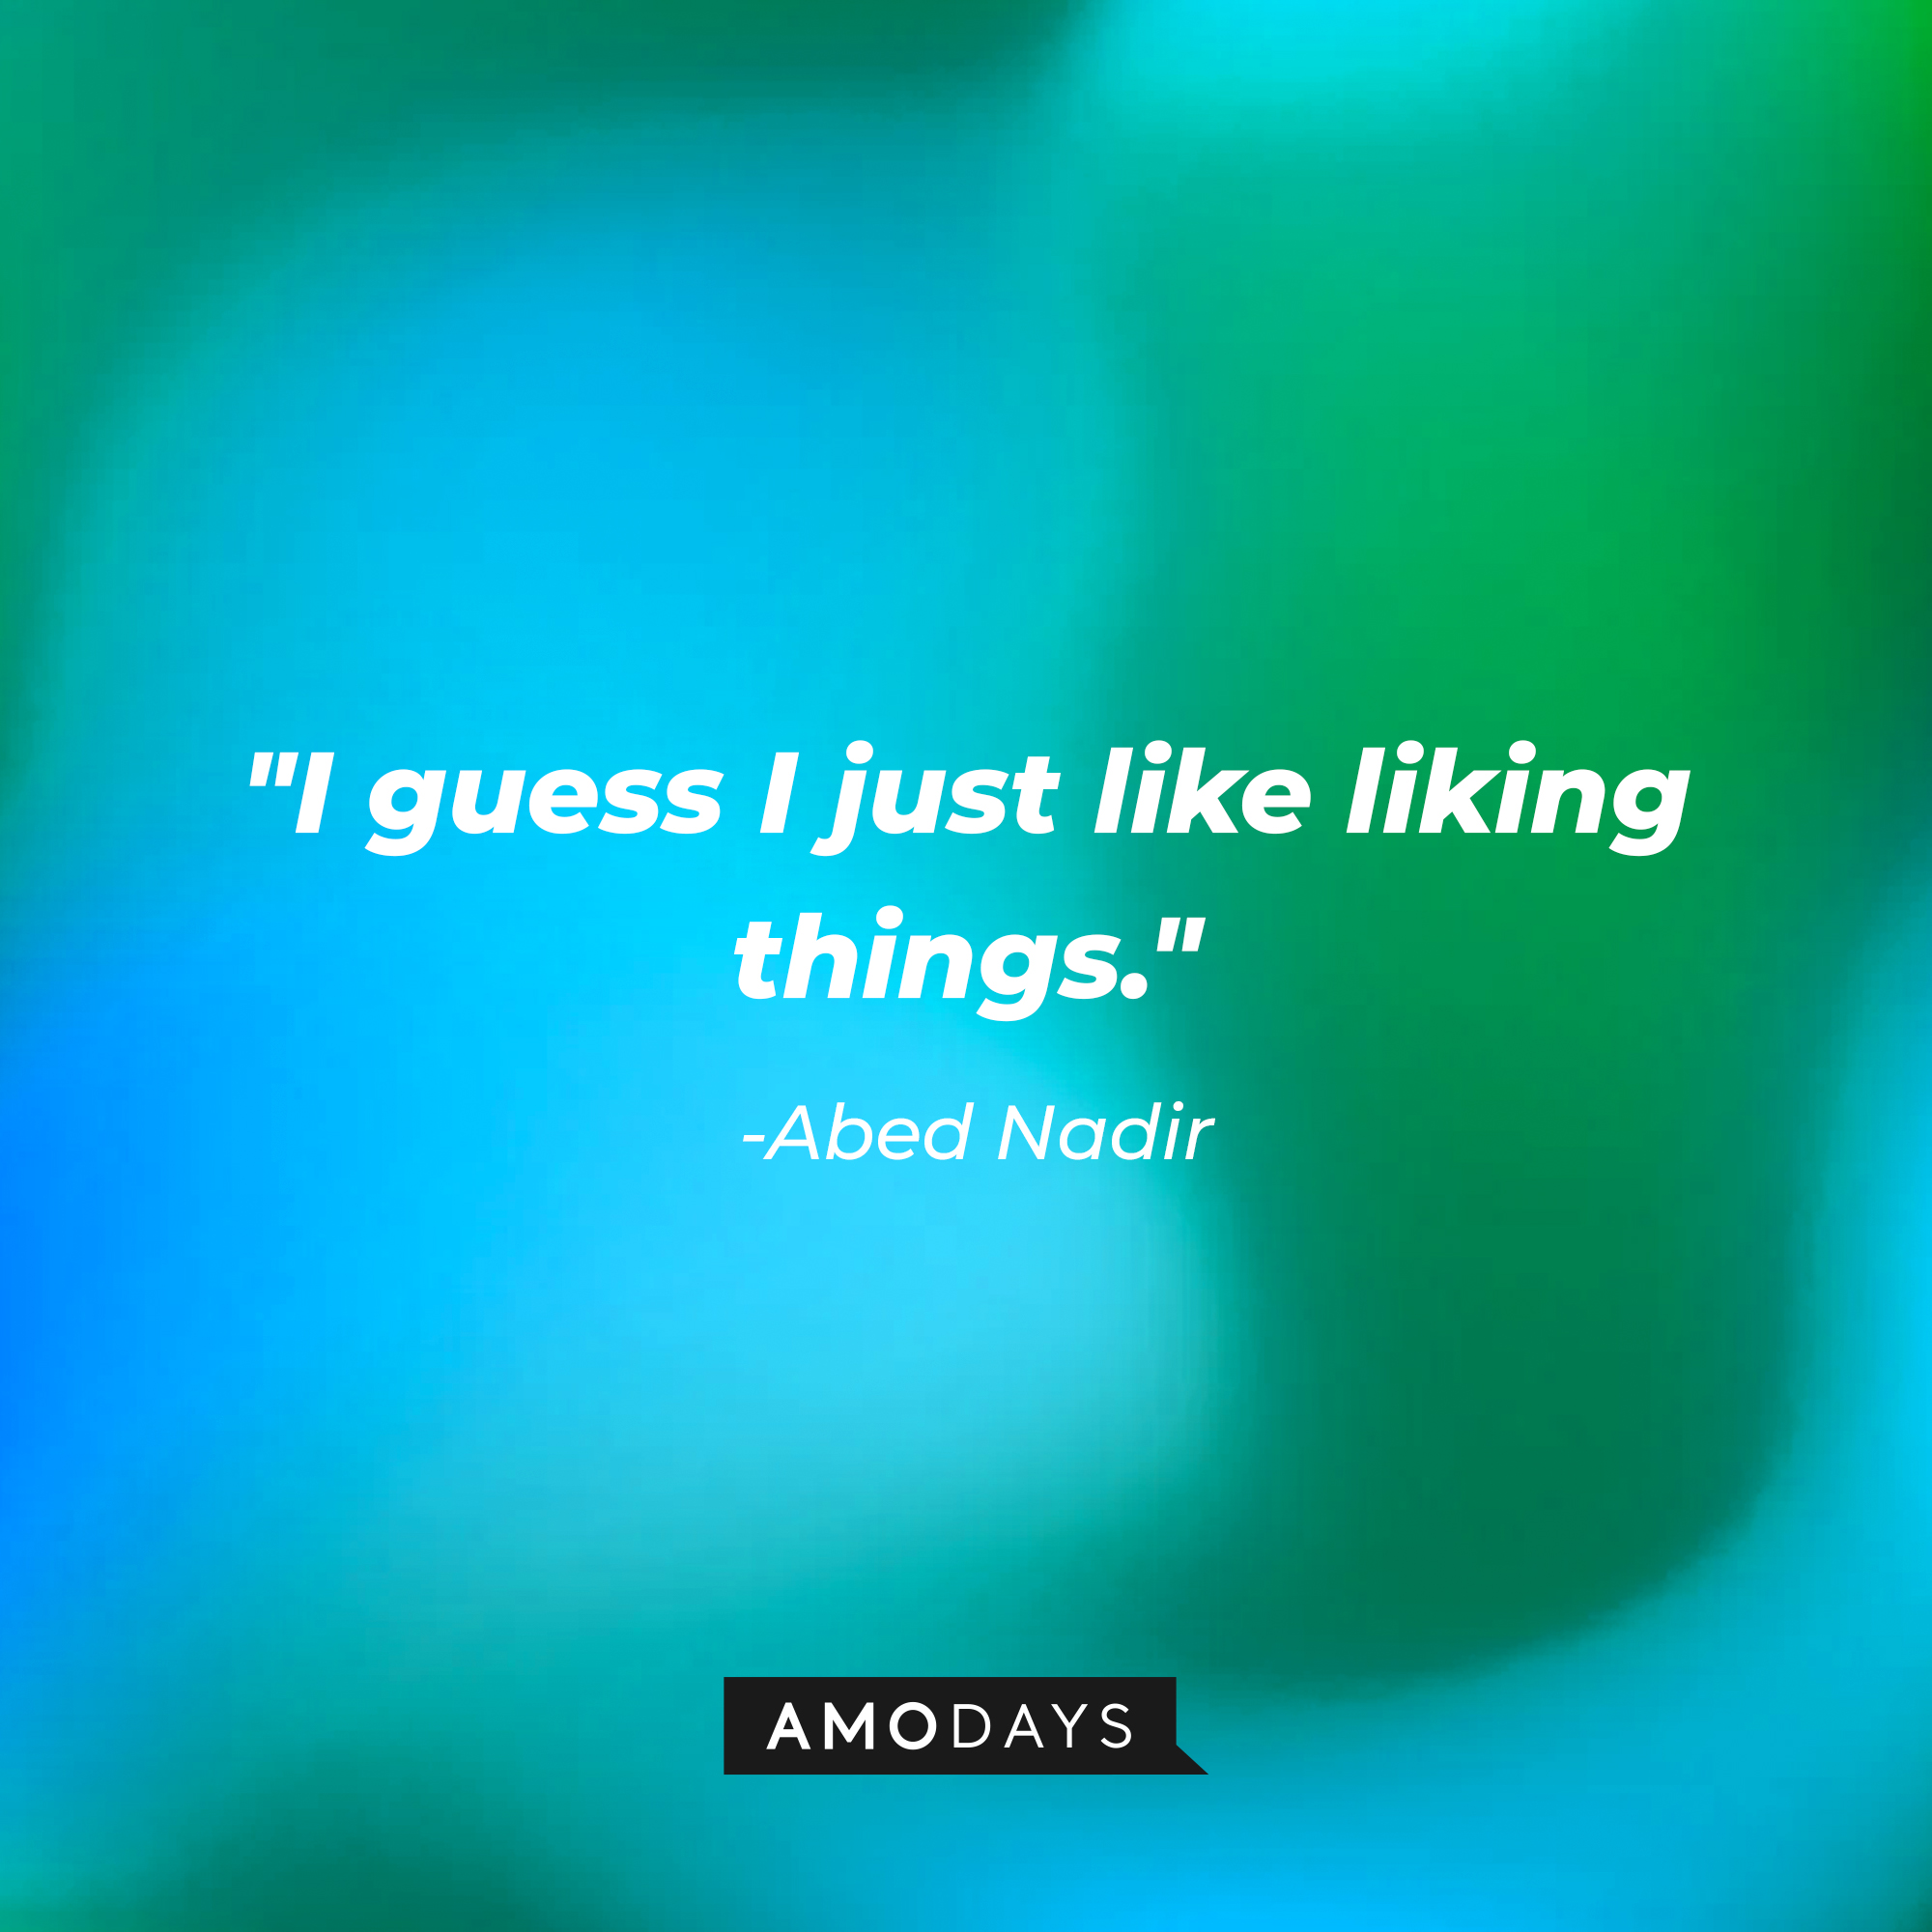 Abed Nadir’s quote: "I guess I just like liking things." | Source: AmoDays